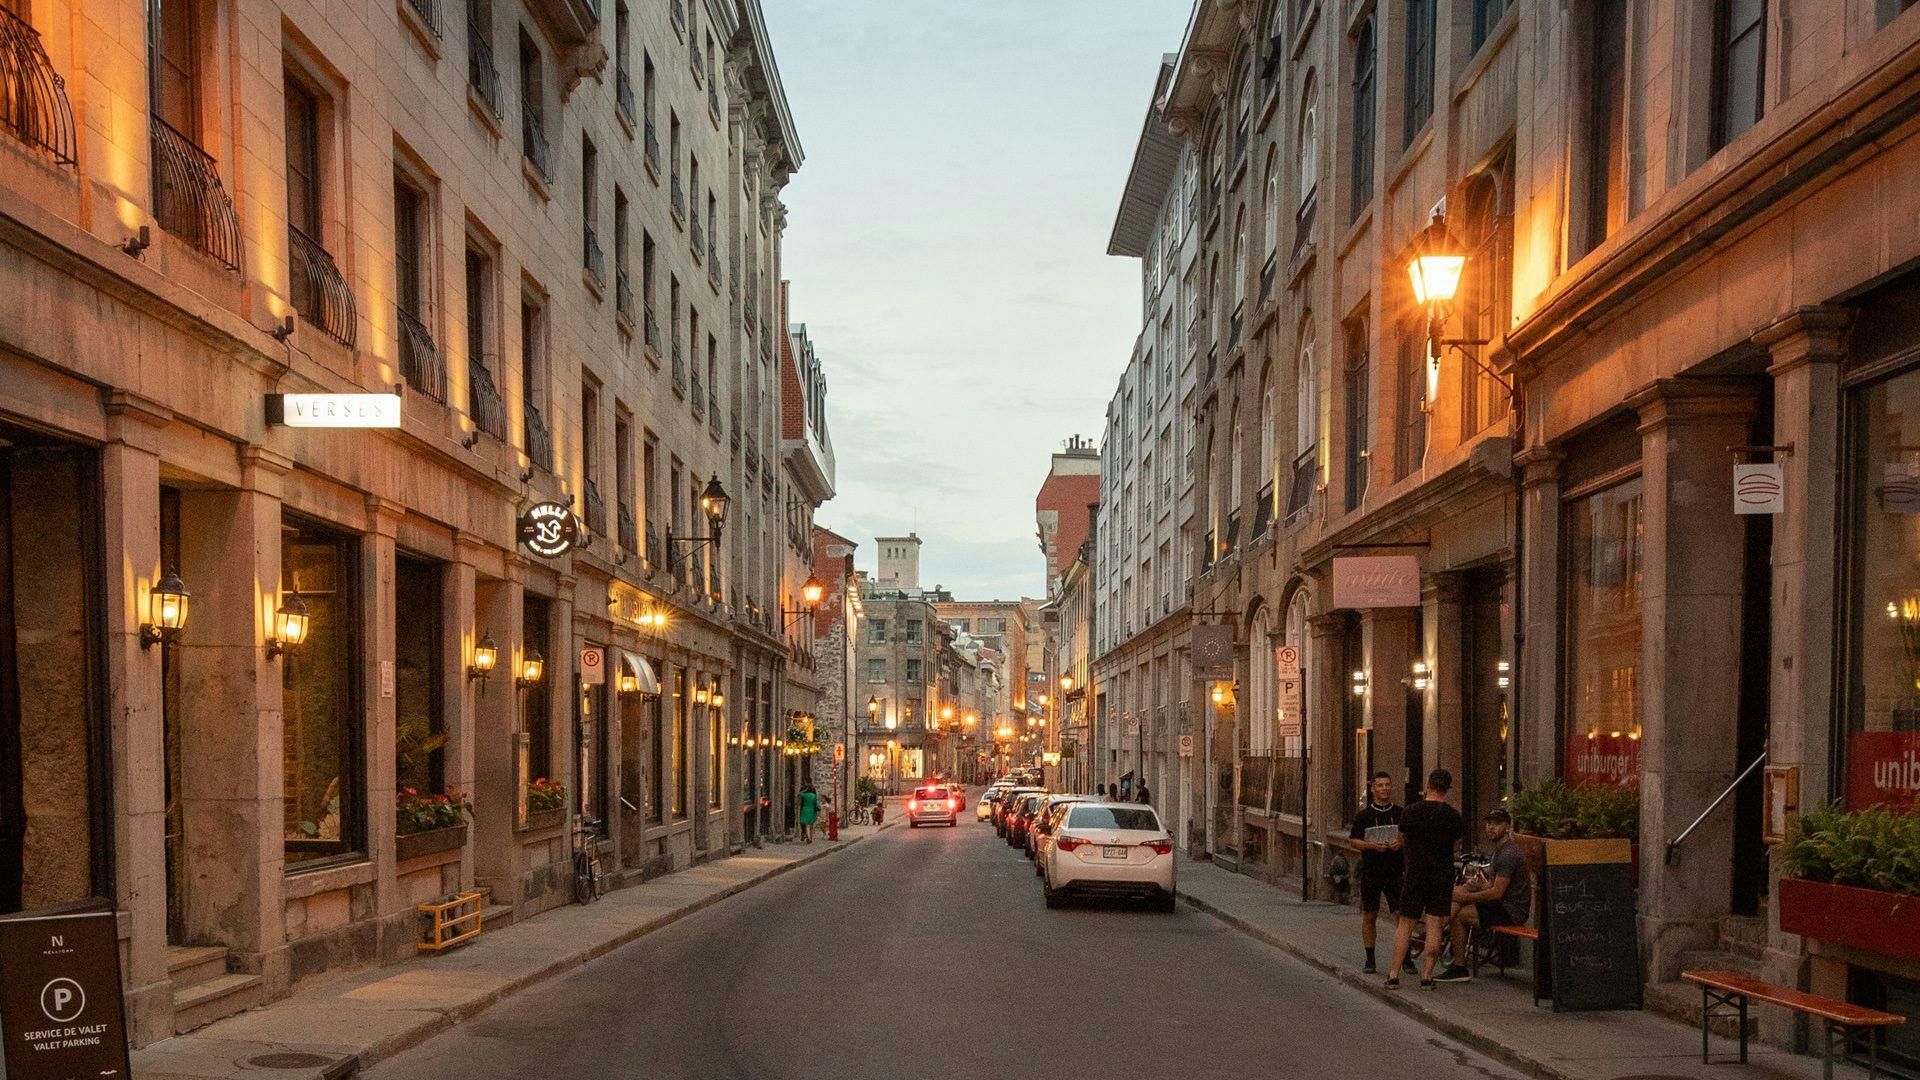 Old Montreal at sunset, grand stone buildings frame the historic street where Scandinave Spa is located.